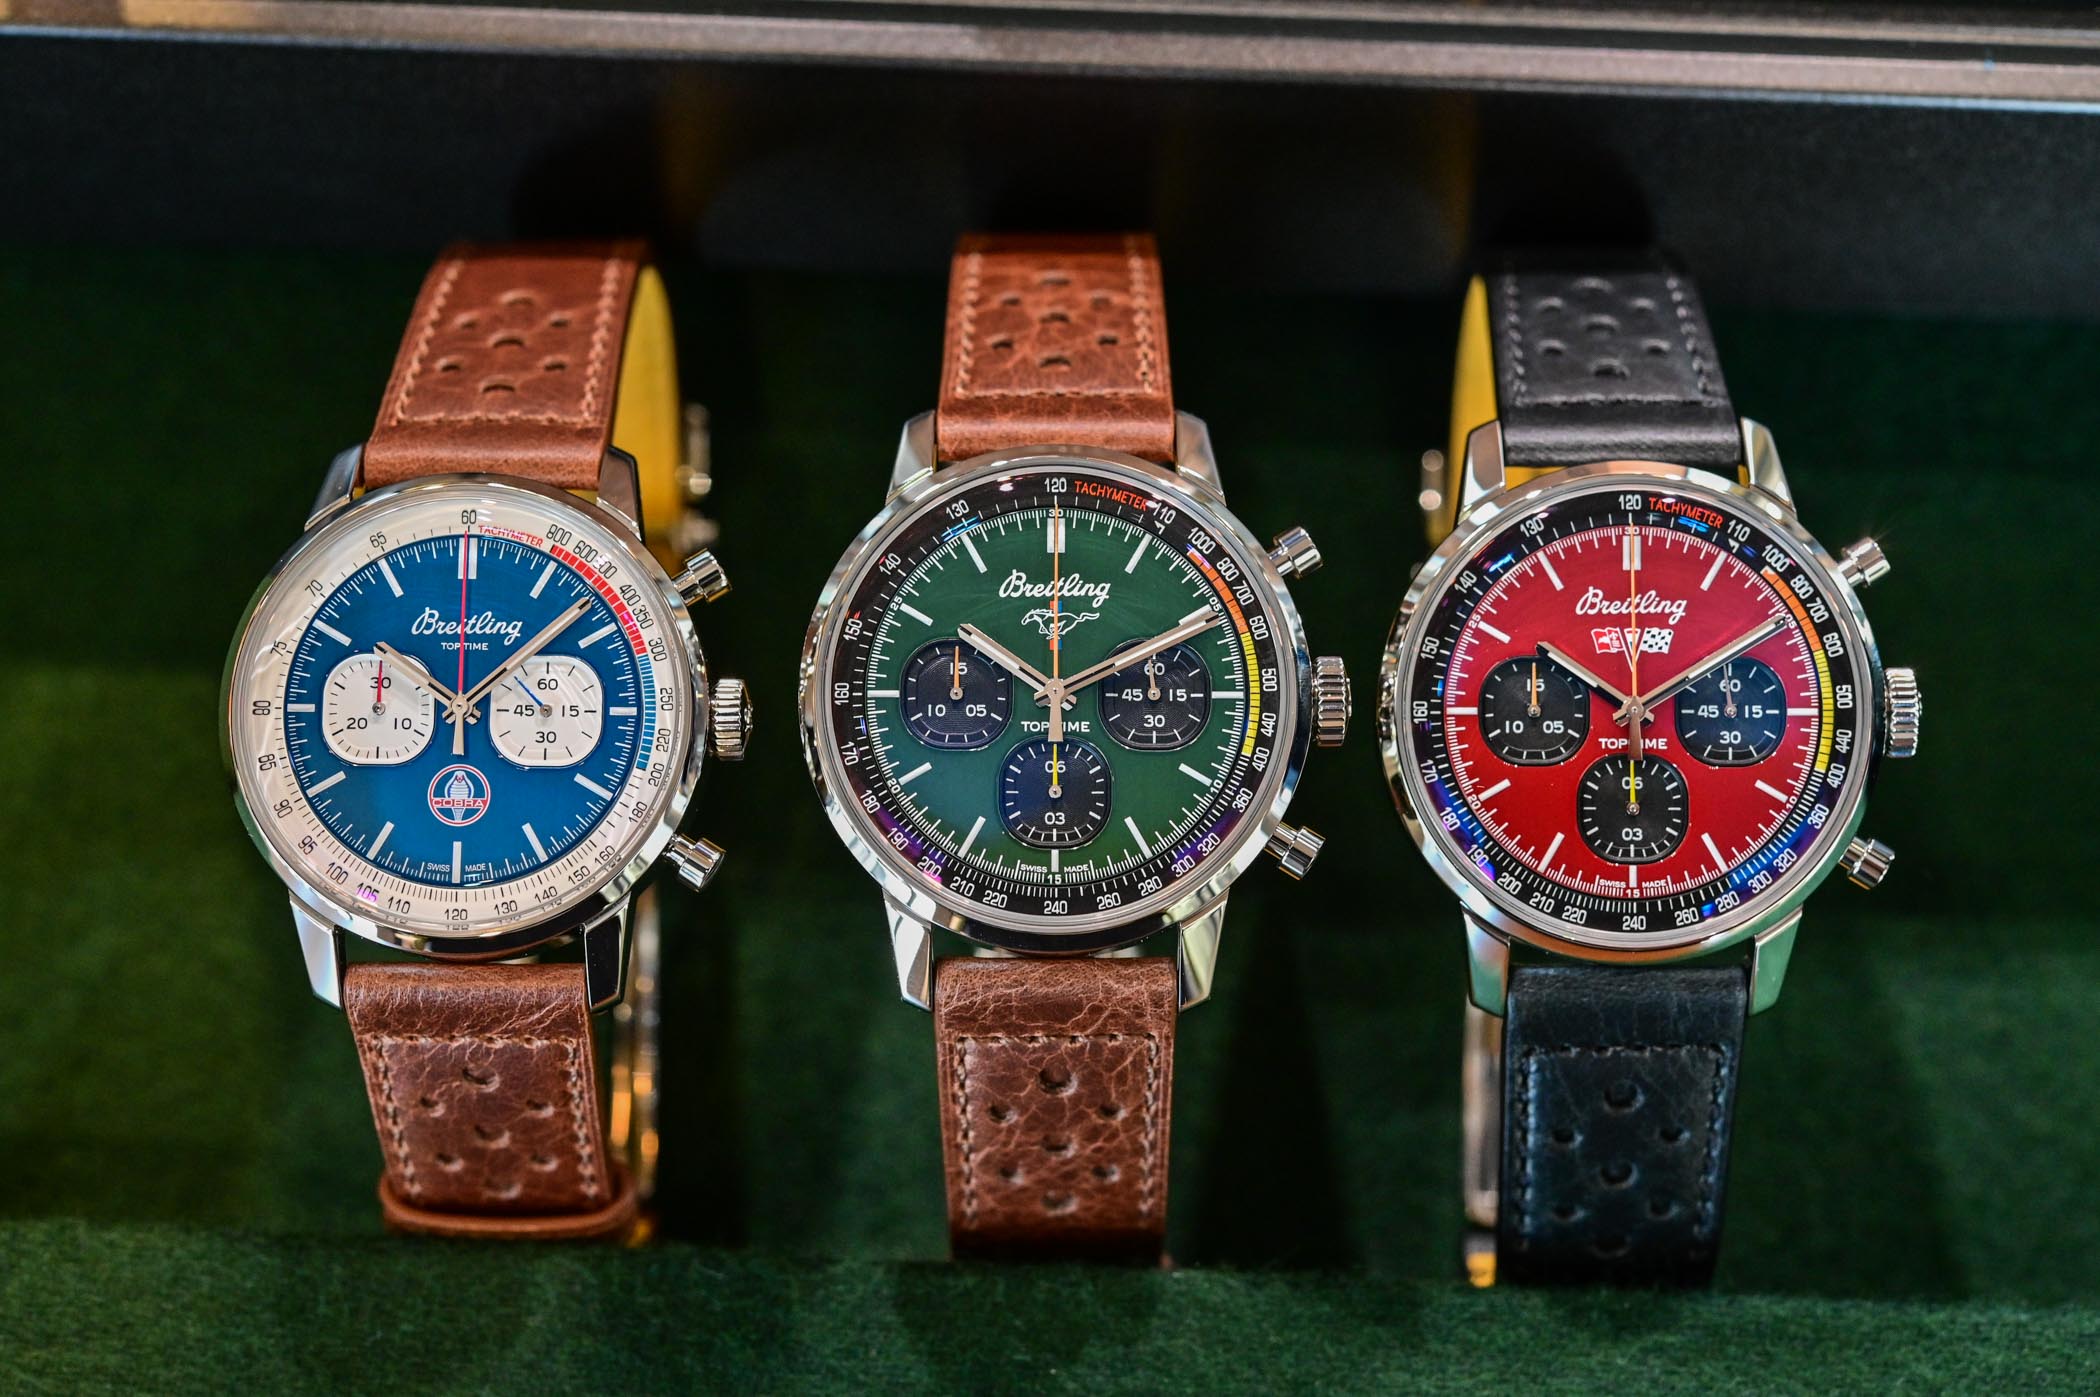 Breitling Top Time Classic Cars Capsule Collection Hands-On, Price